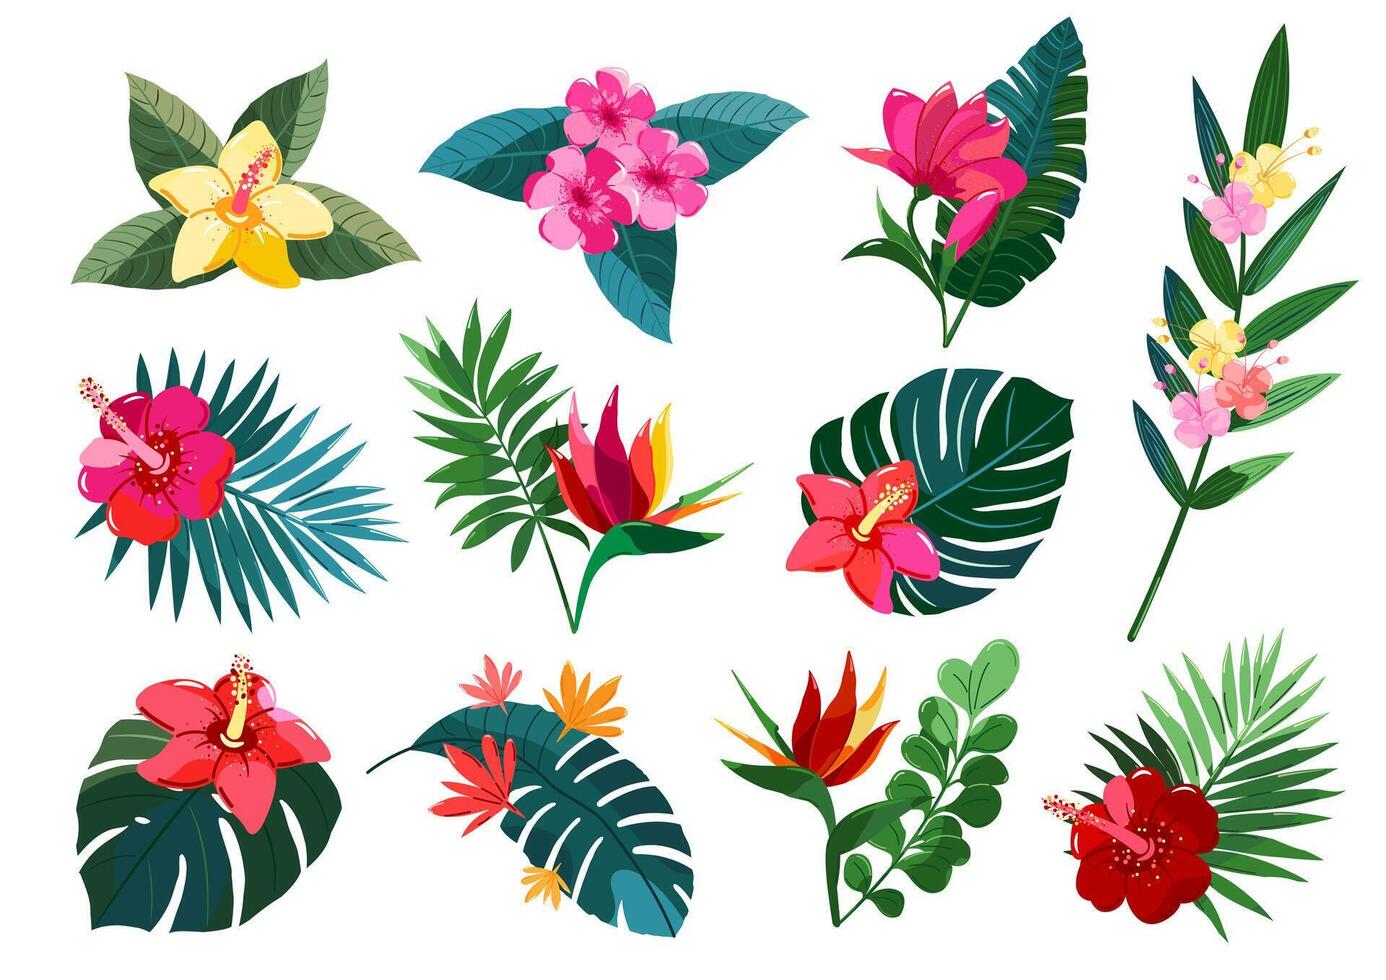 A collection flower designs. vector